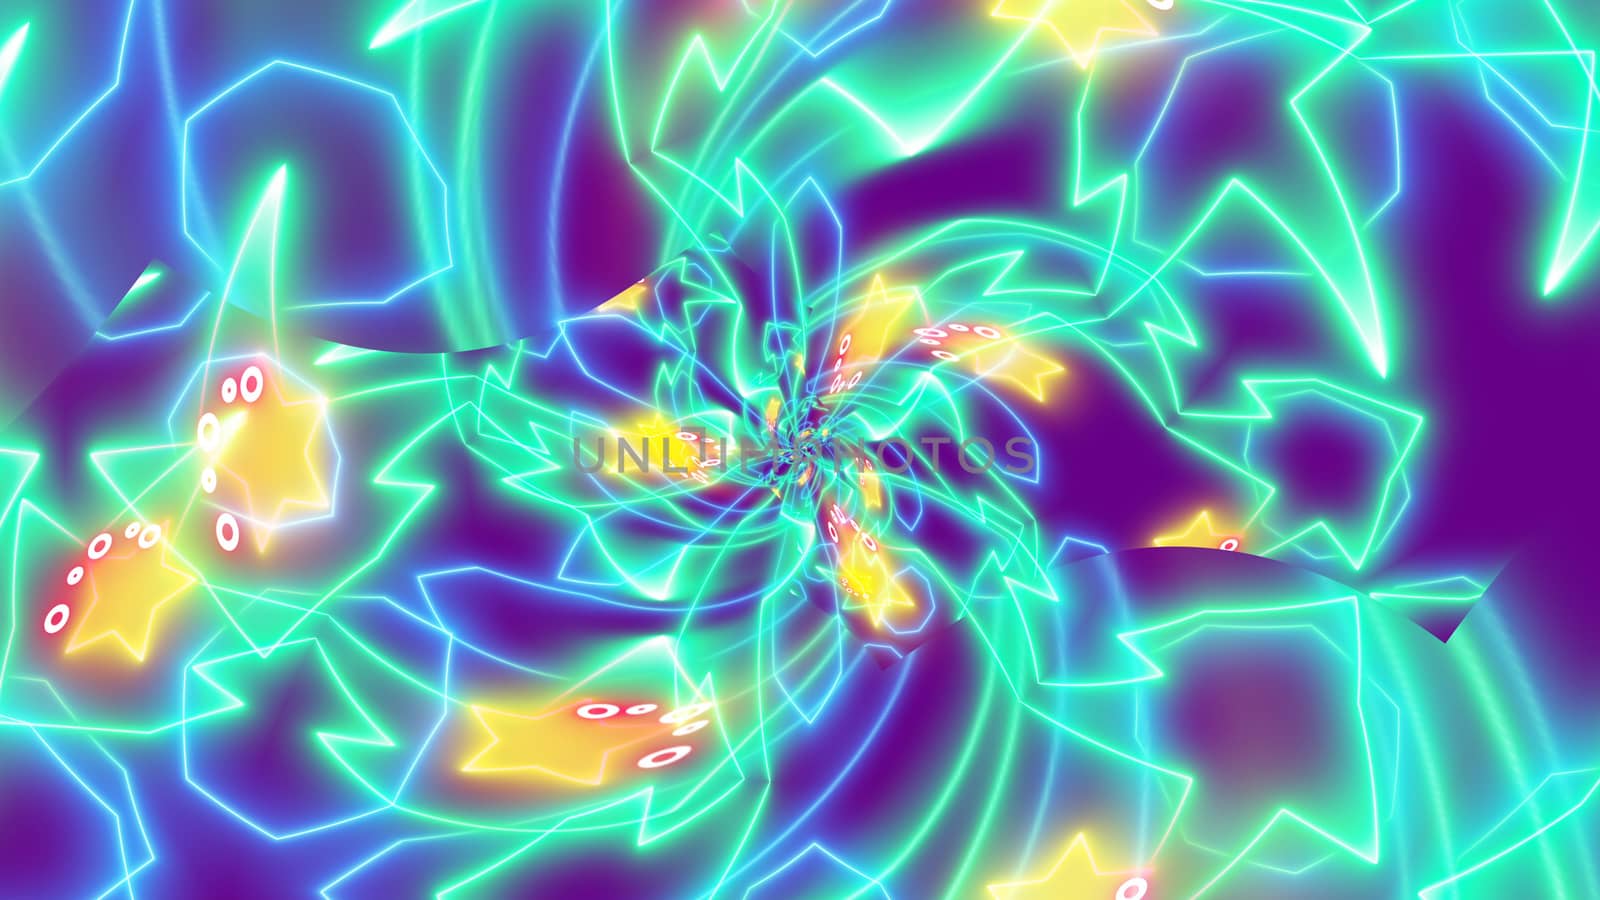 An artistic 3d rendering of a bizarre psychedelic background with yellow stars, blue and white lines sparkling in the violet background.  It looks enigmatic and dreamlike.